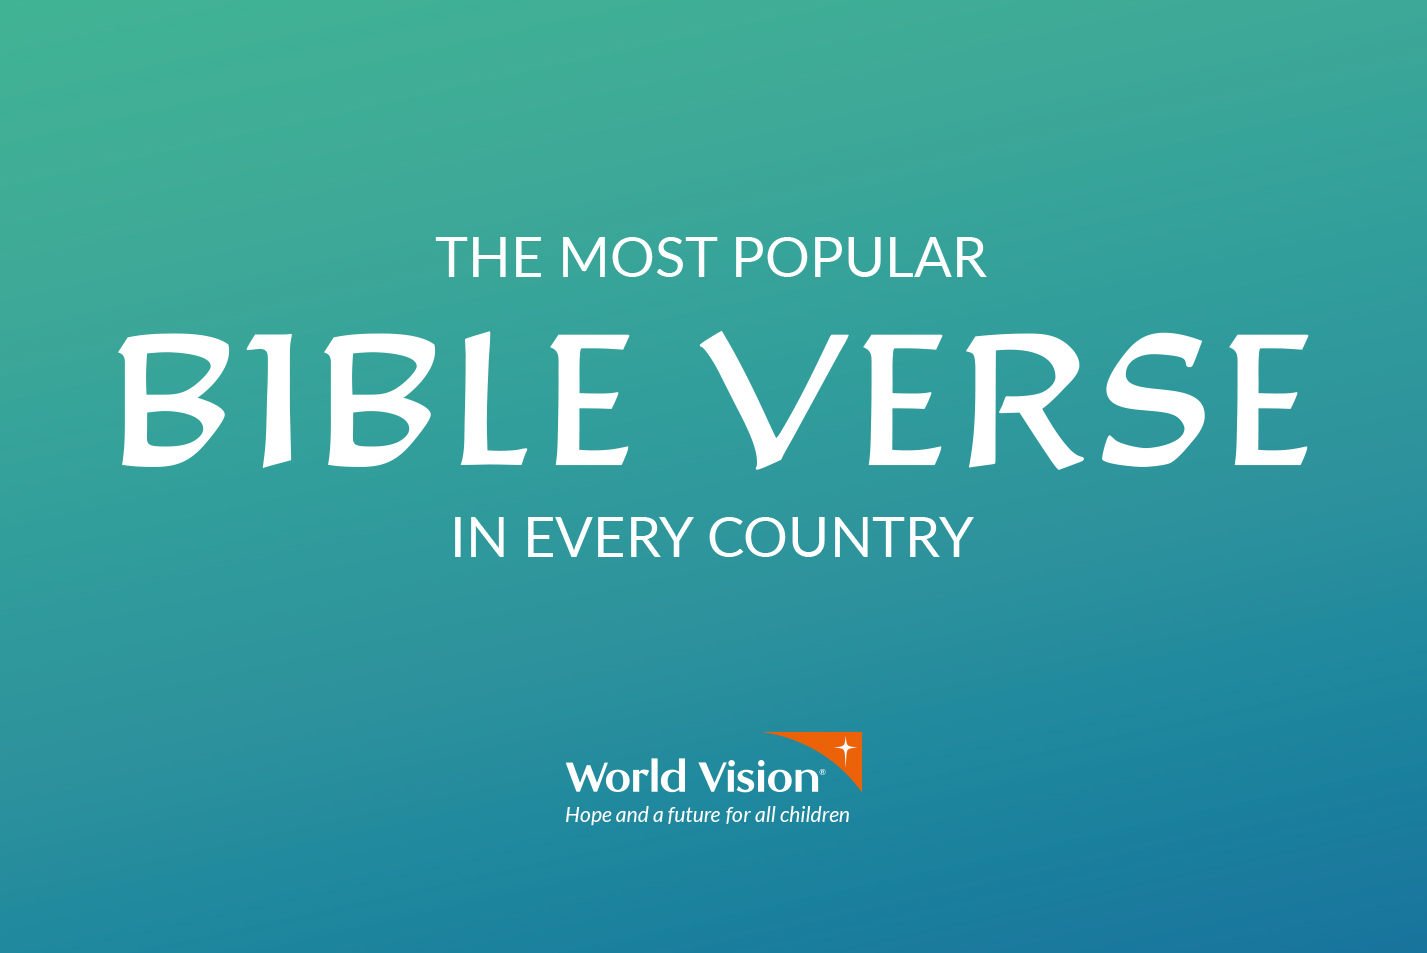 The Most Popular Bible Verse in Every Country by World Vision